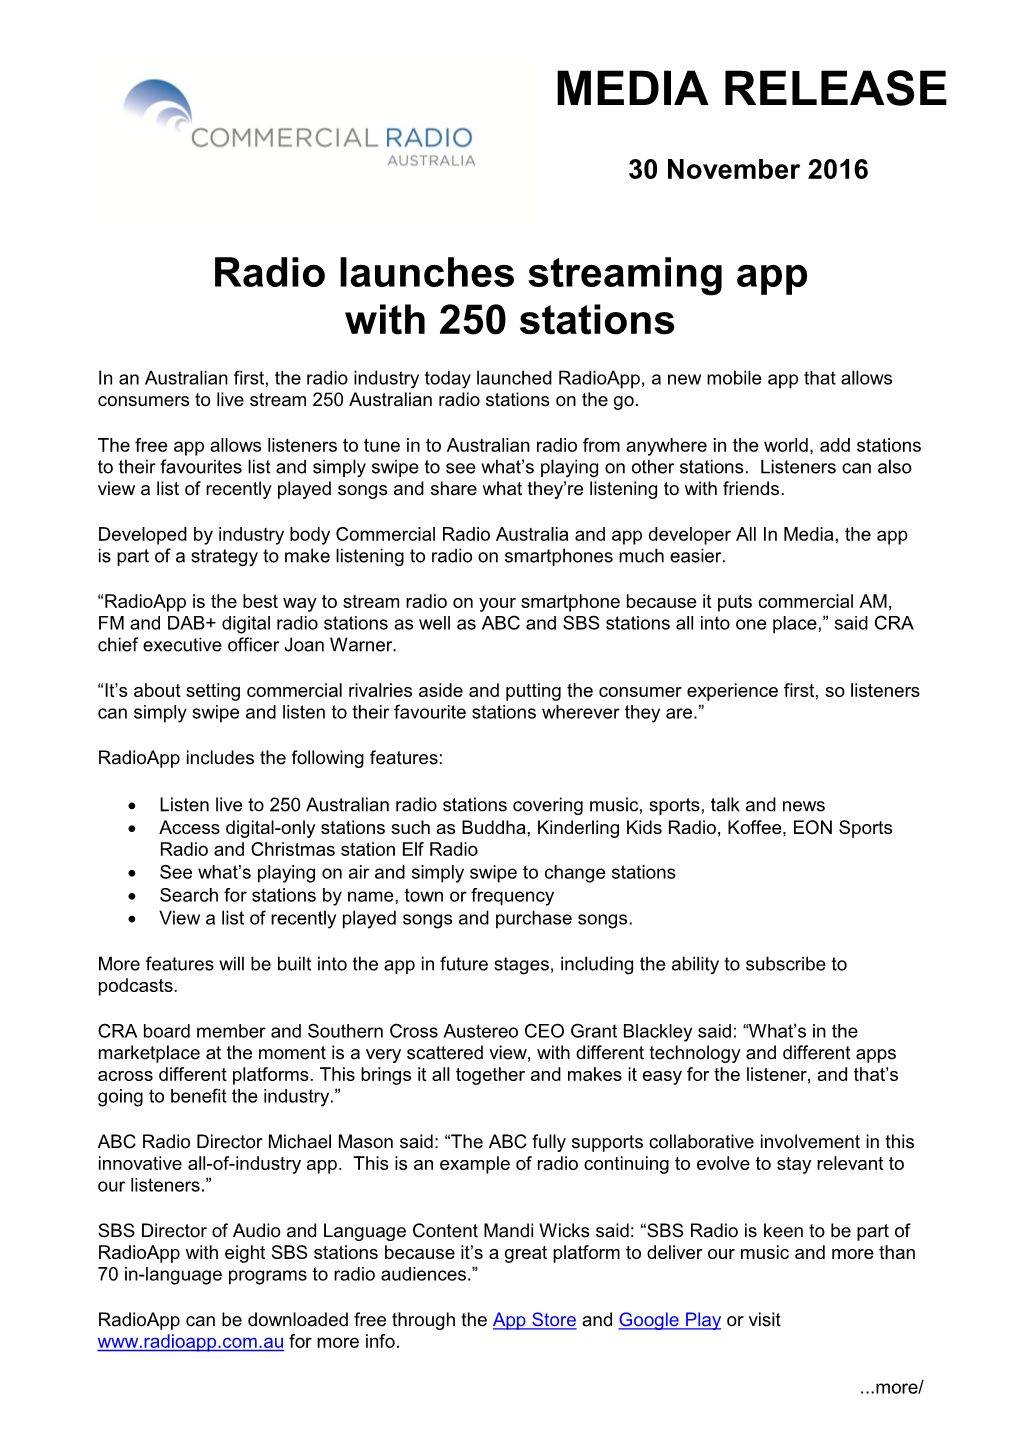 Commercial Radio Australia and App Developer All in Media, the App Is Part of a Strategy to Make Listening to Radio on Smartphones Much Easier